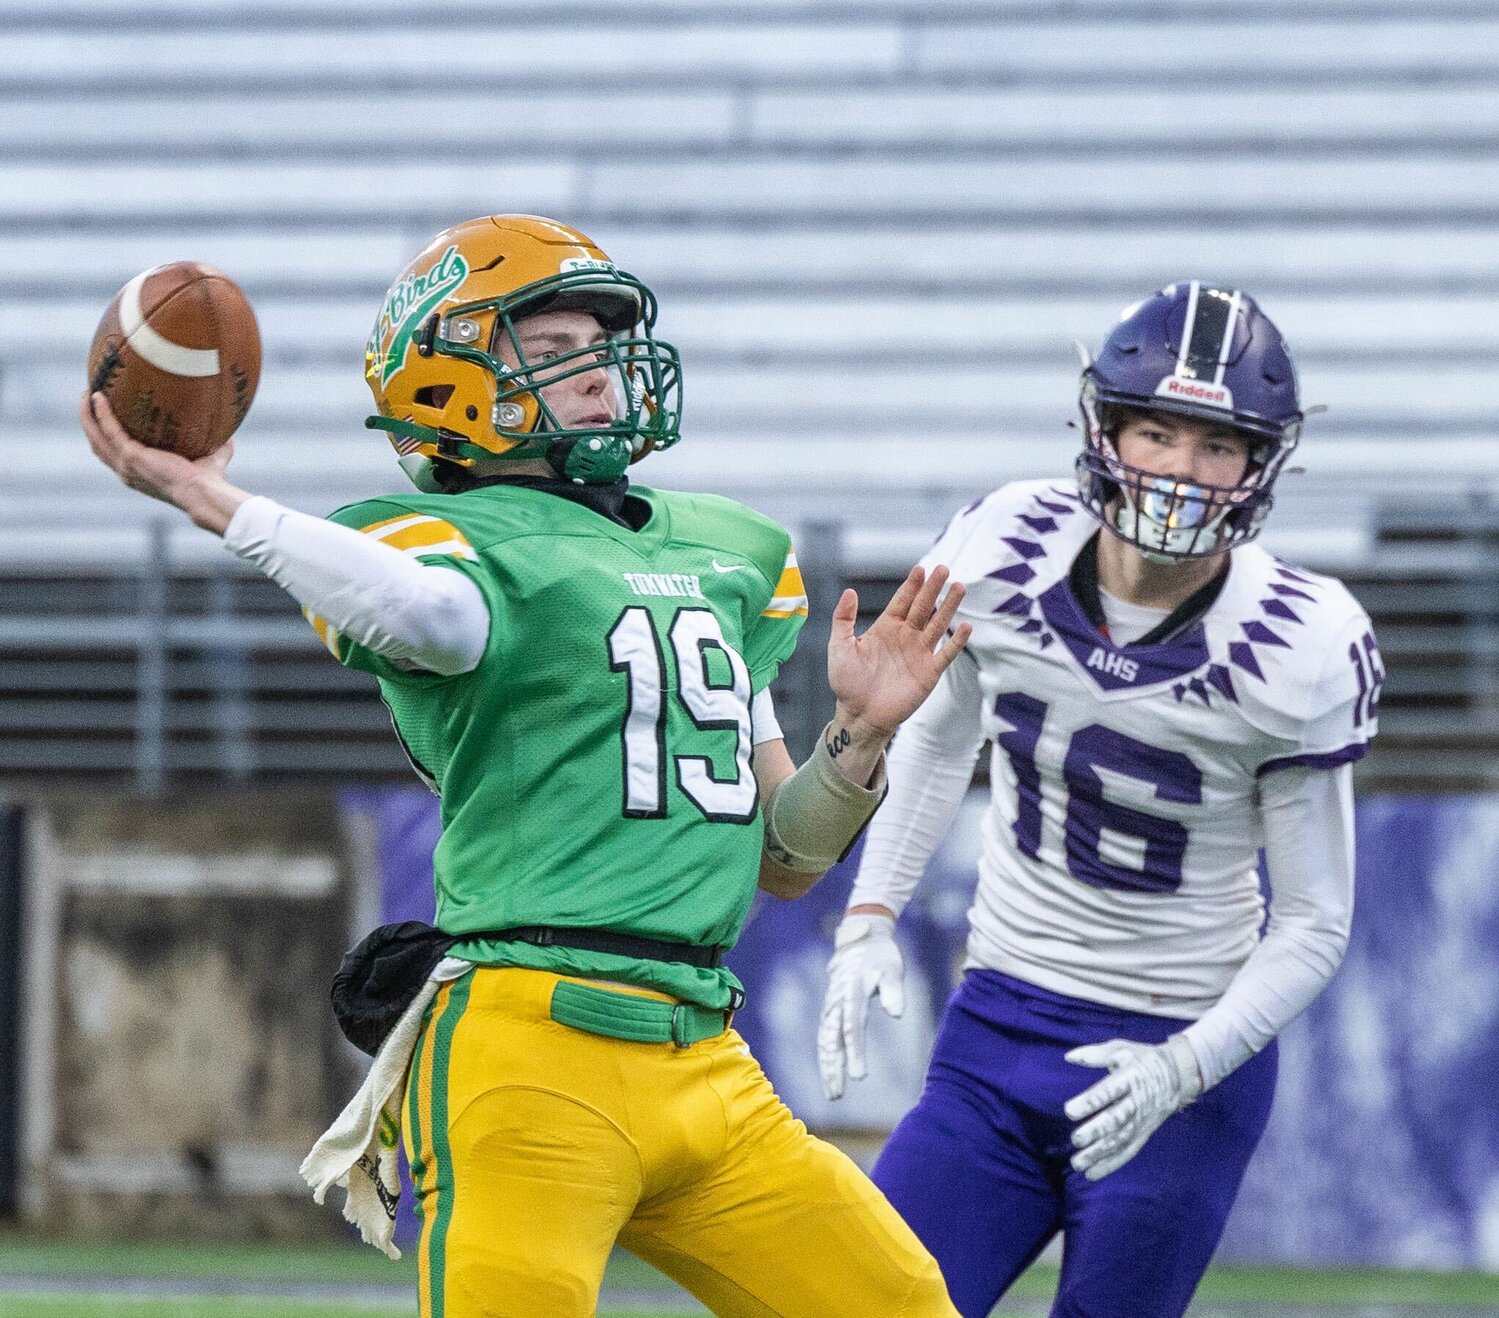 Ethan Kastner throws a pass downfield in the first half of Tumwater's 60-30 loss to Anacortes in the 2A state title game, Dec. 2 in Seattle.